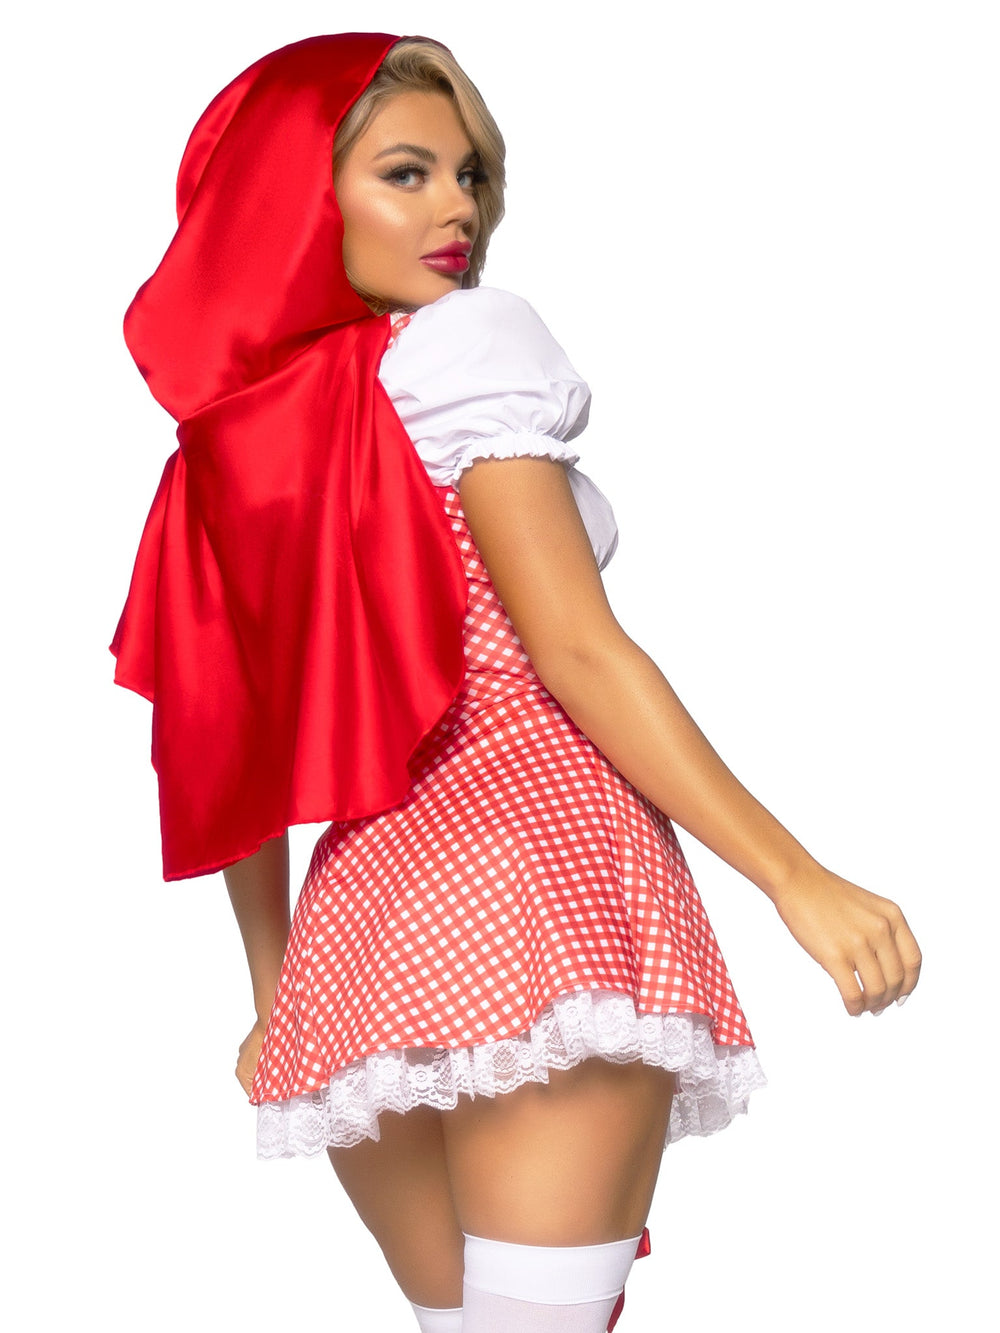 87119-fairytale-miss-red-costume, 